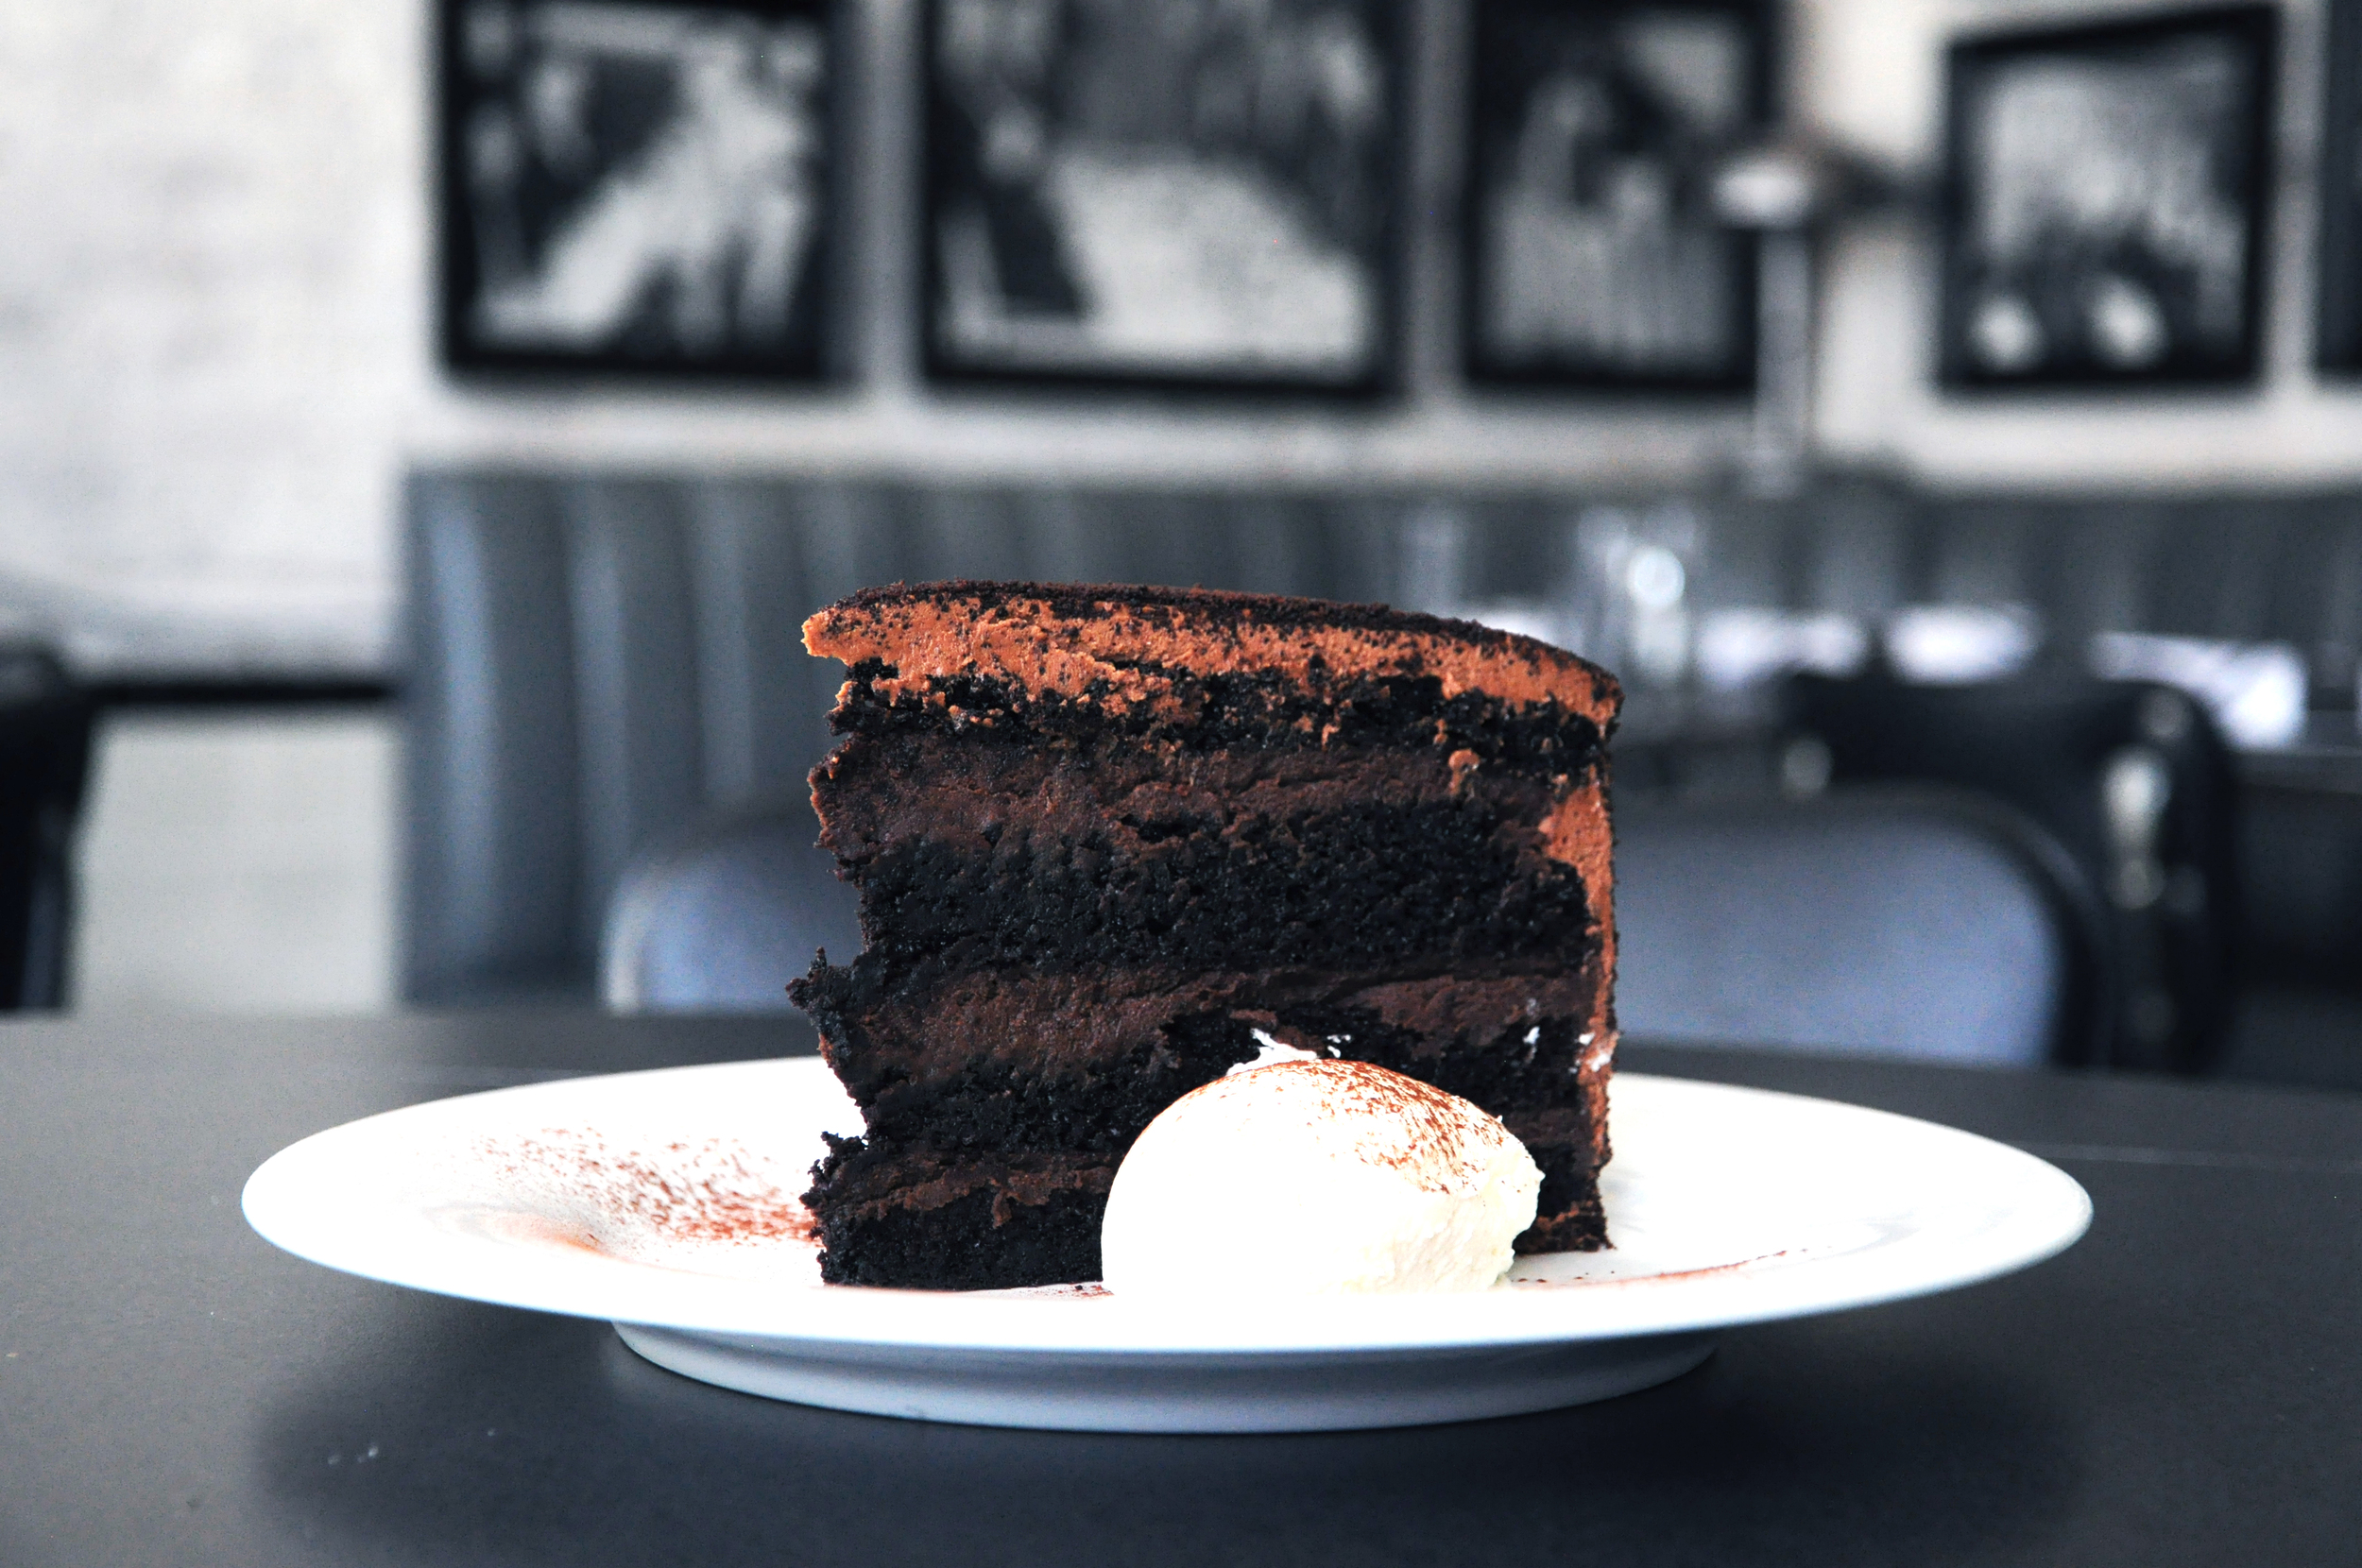  Brooklyn blackout cake at Empire Diner 